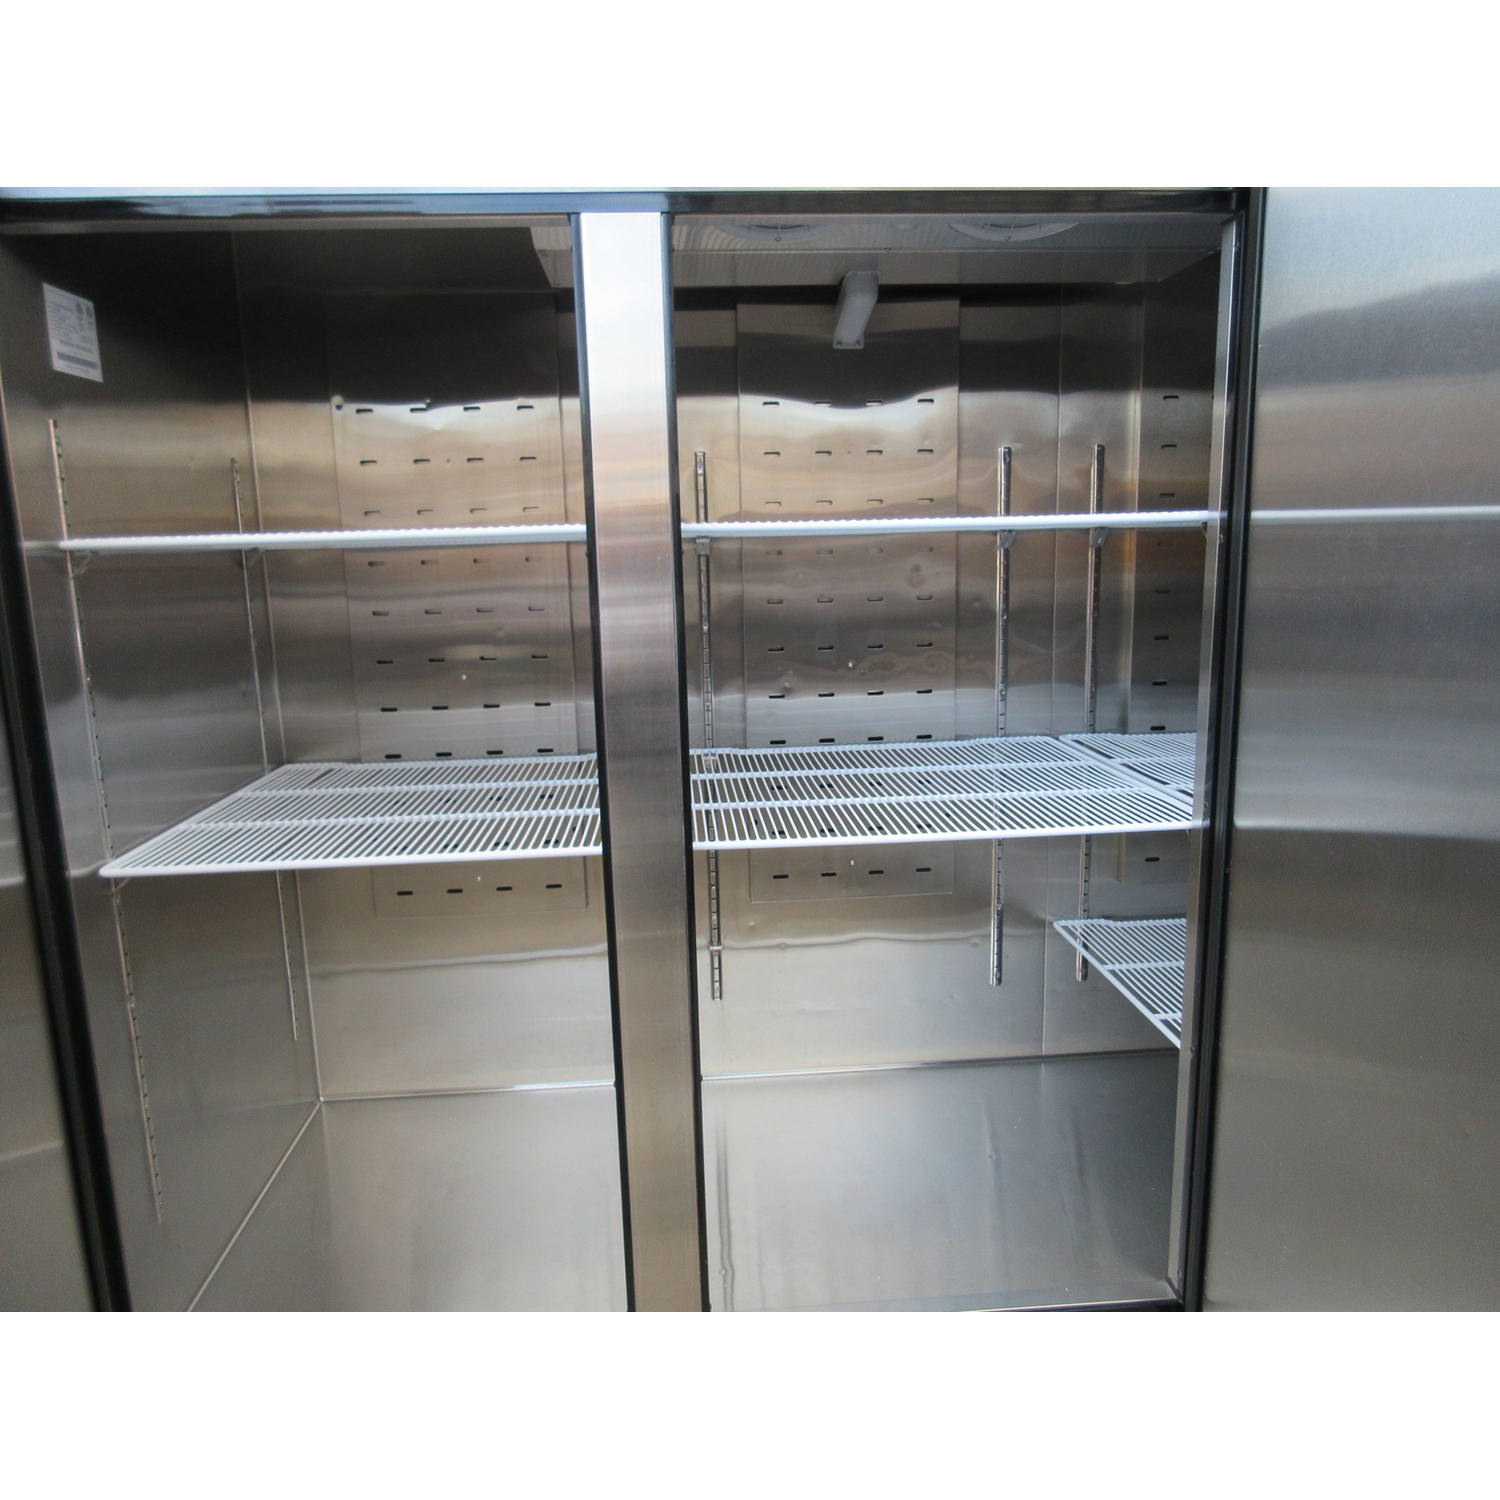 Atosa MBF8504GR Reach-In Freezer Three Section, Used Excellent Condition image 1